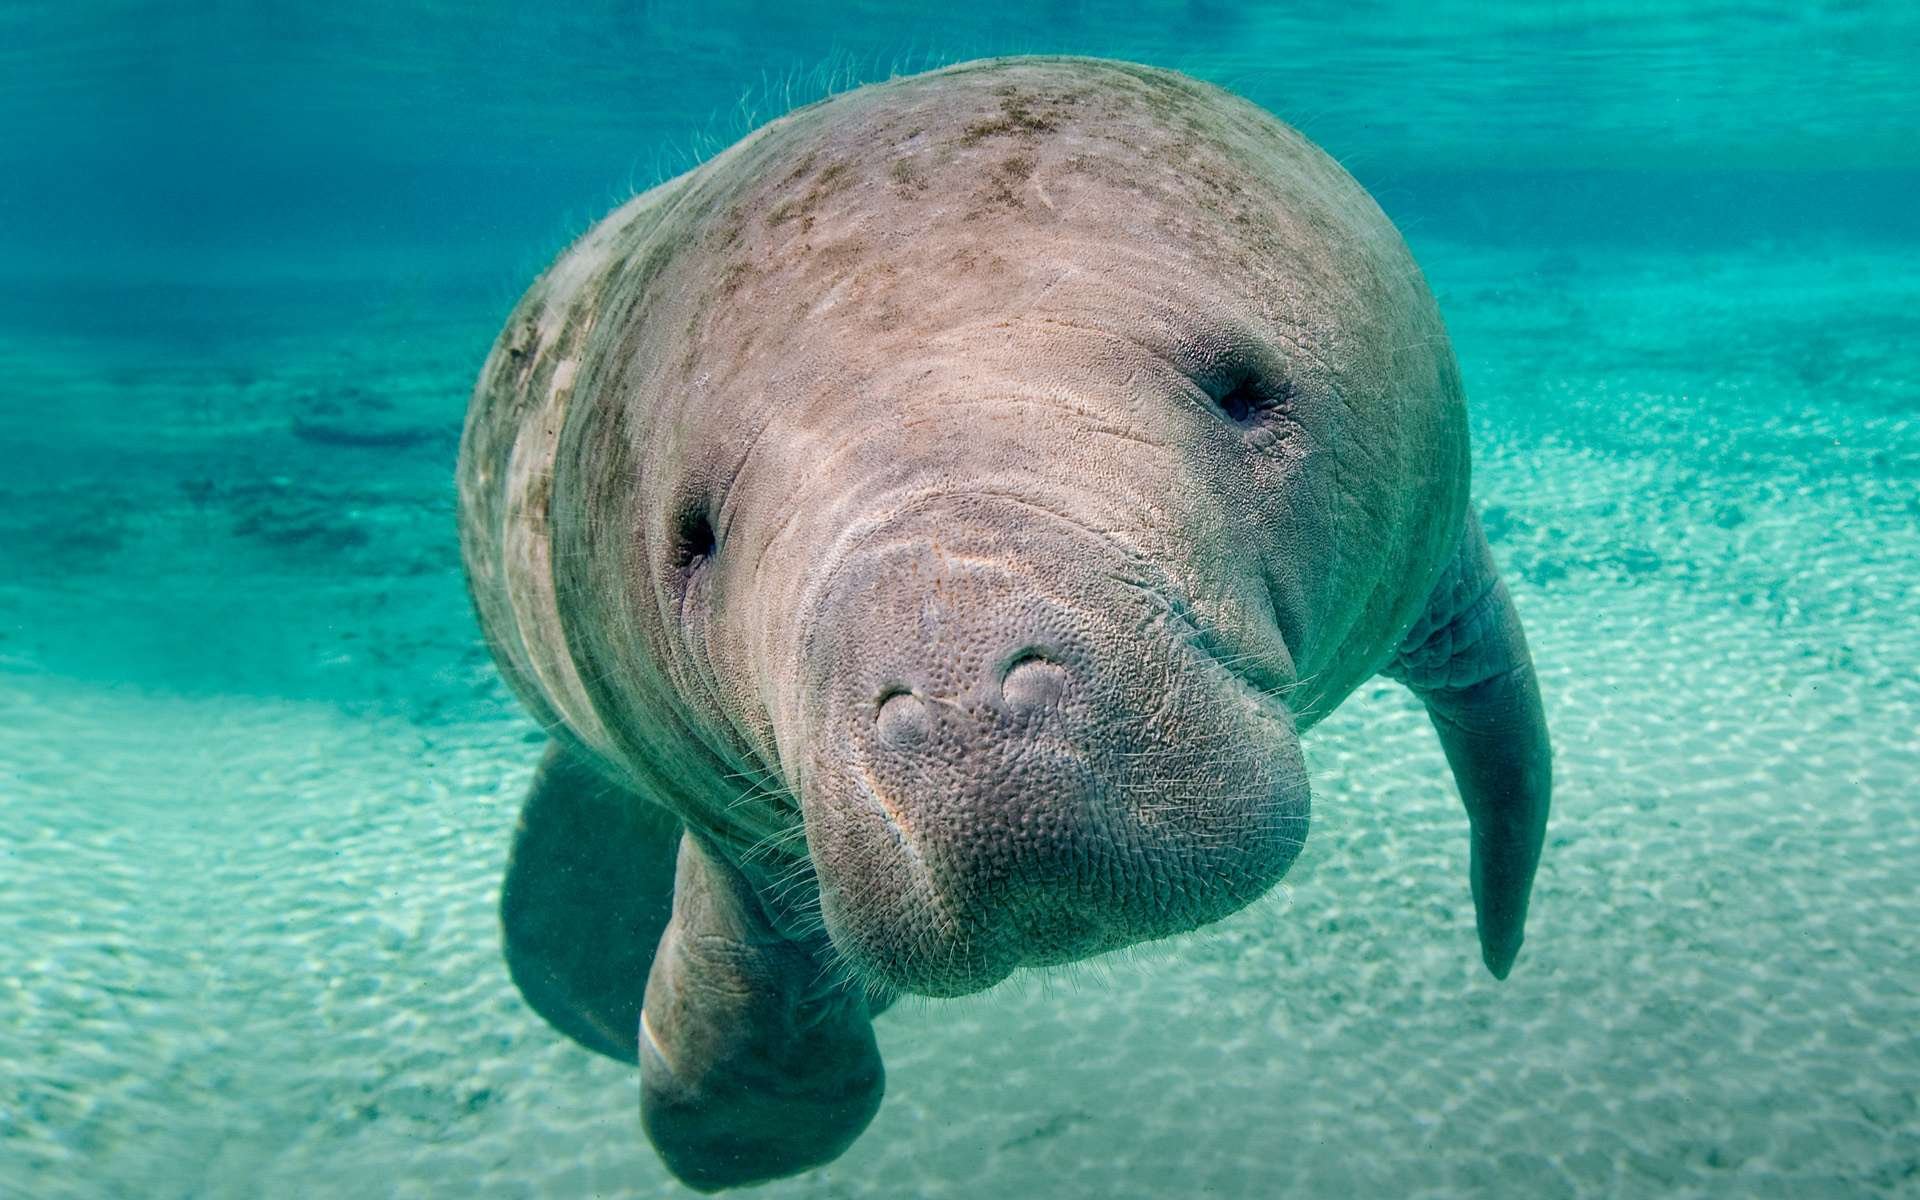 6 Manatee Hd Wallpapers Background Images Wallpaper Abyss Images, Photos, Reviews